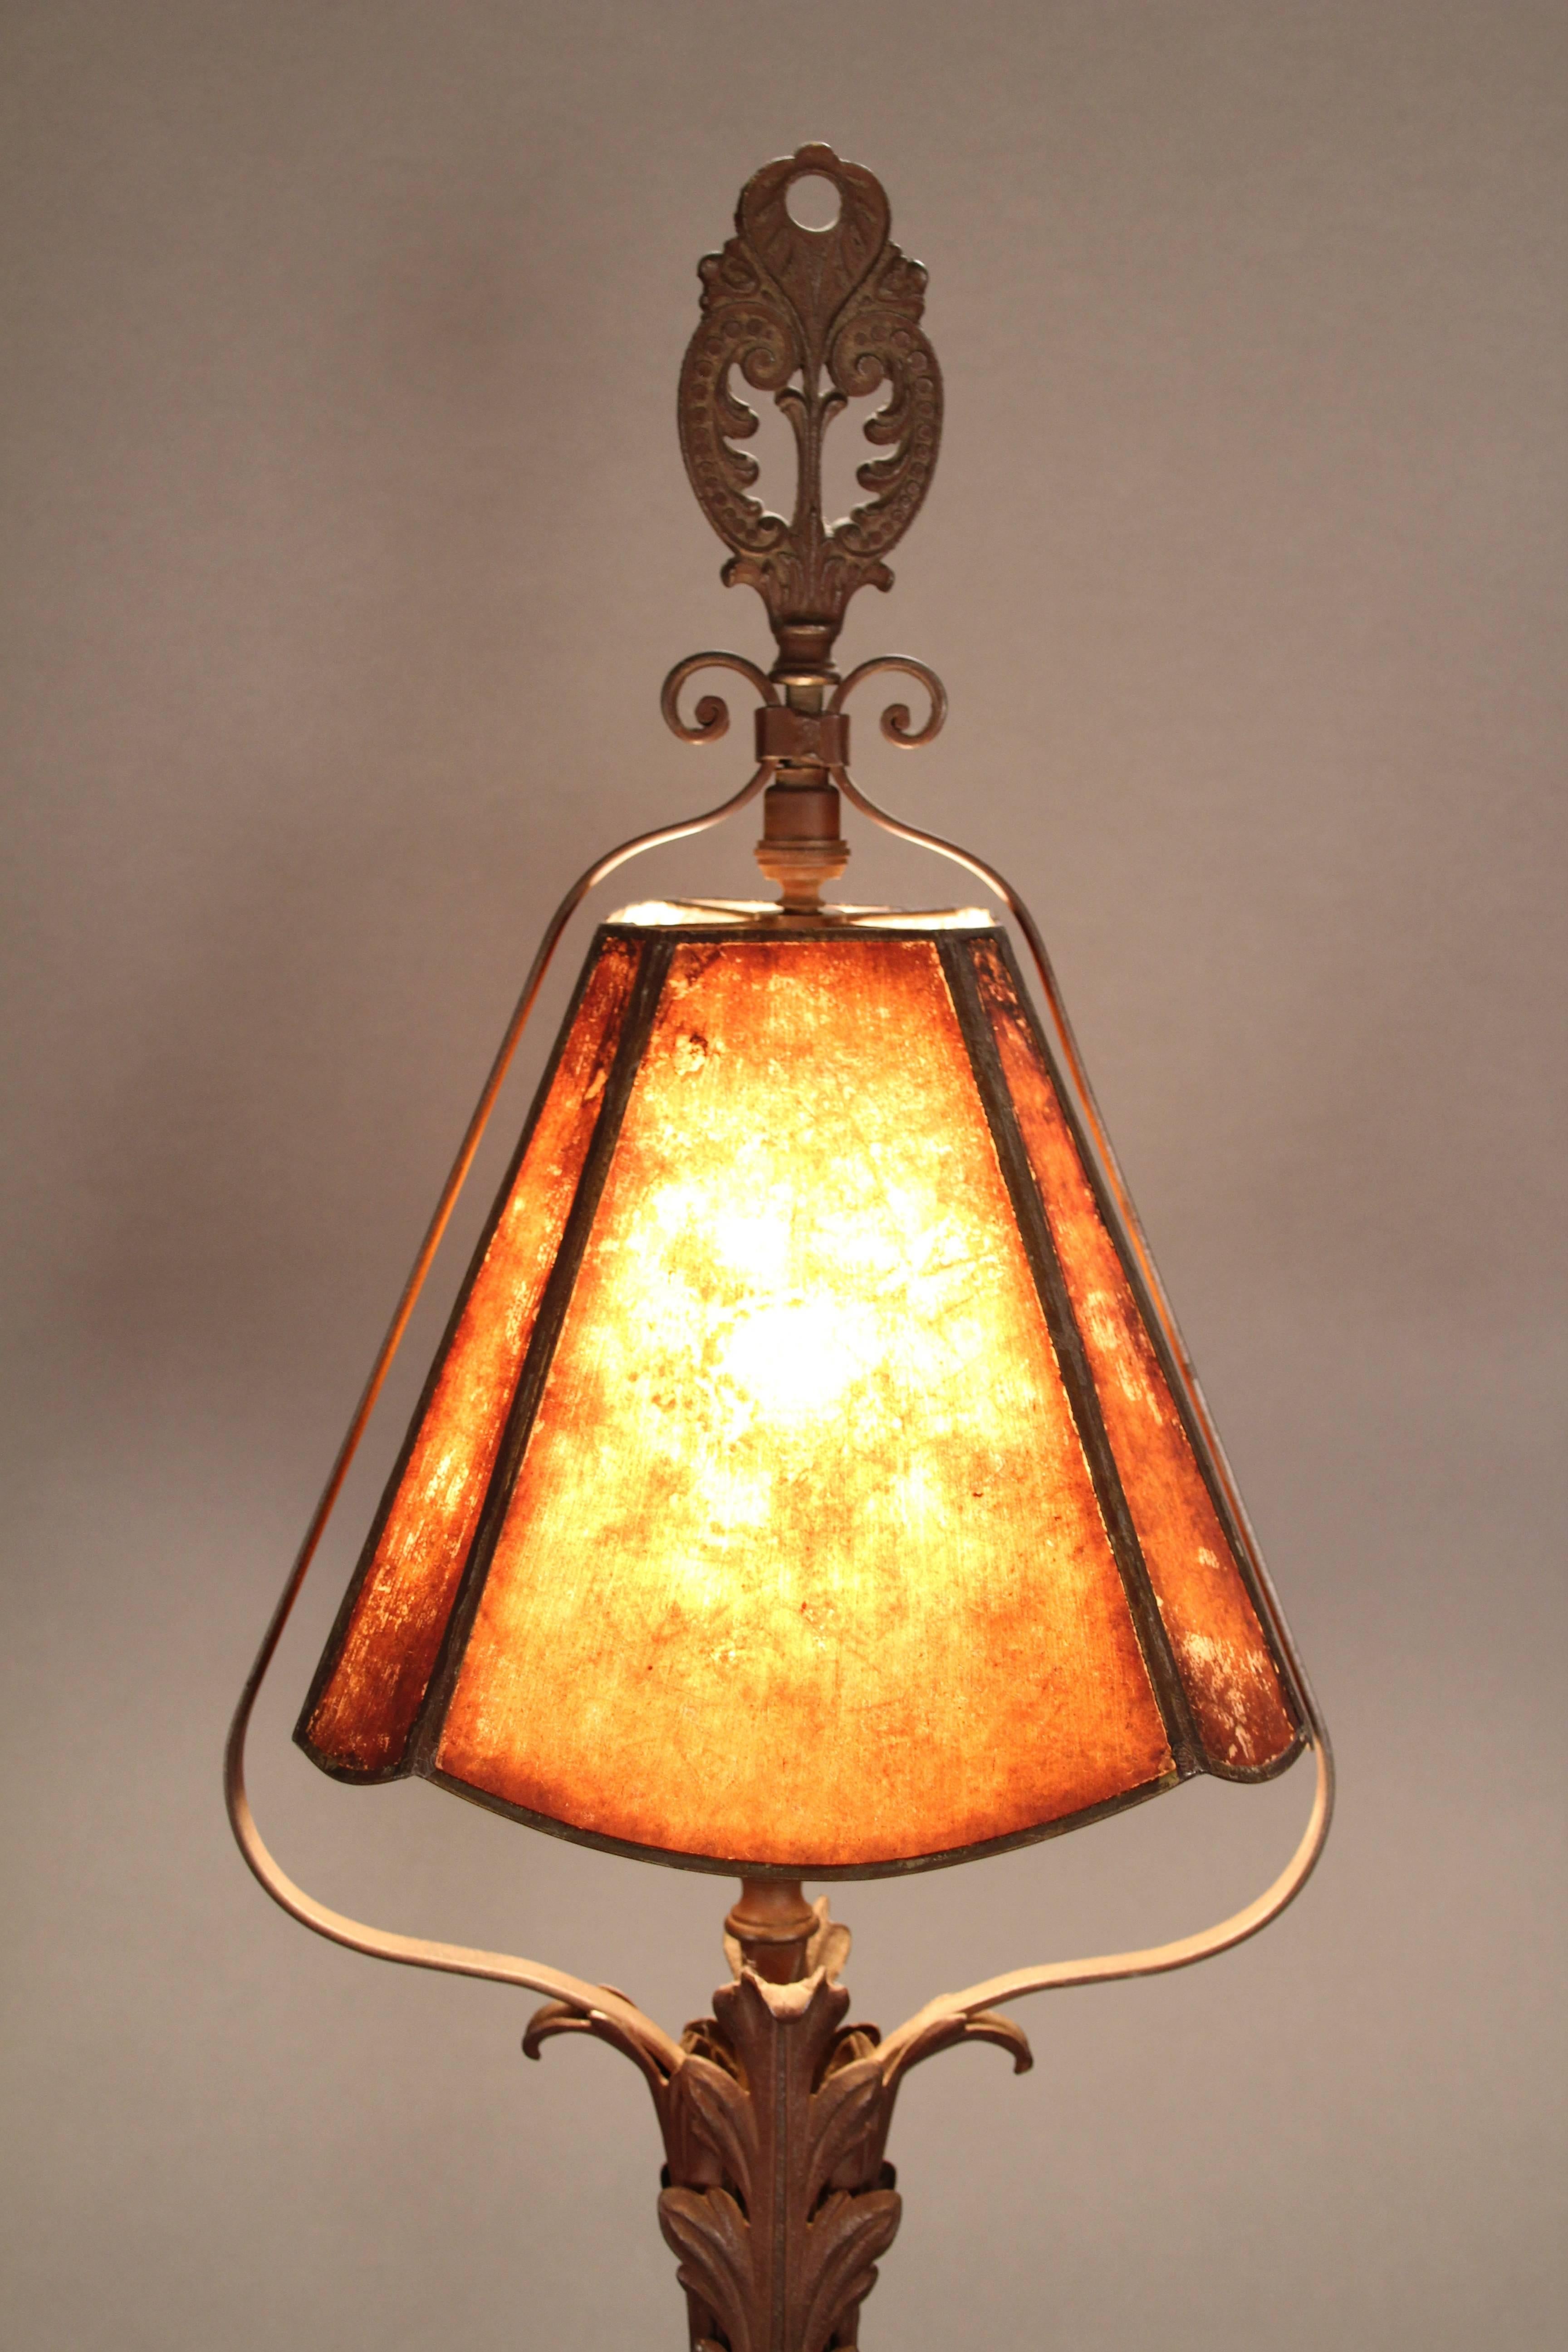 Lamp with multifaceted mica shade, circa 1920s.